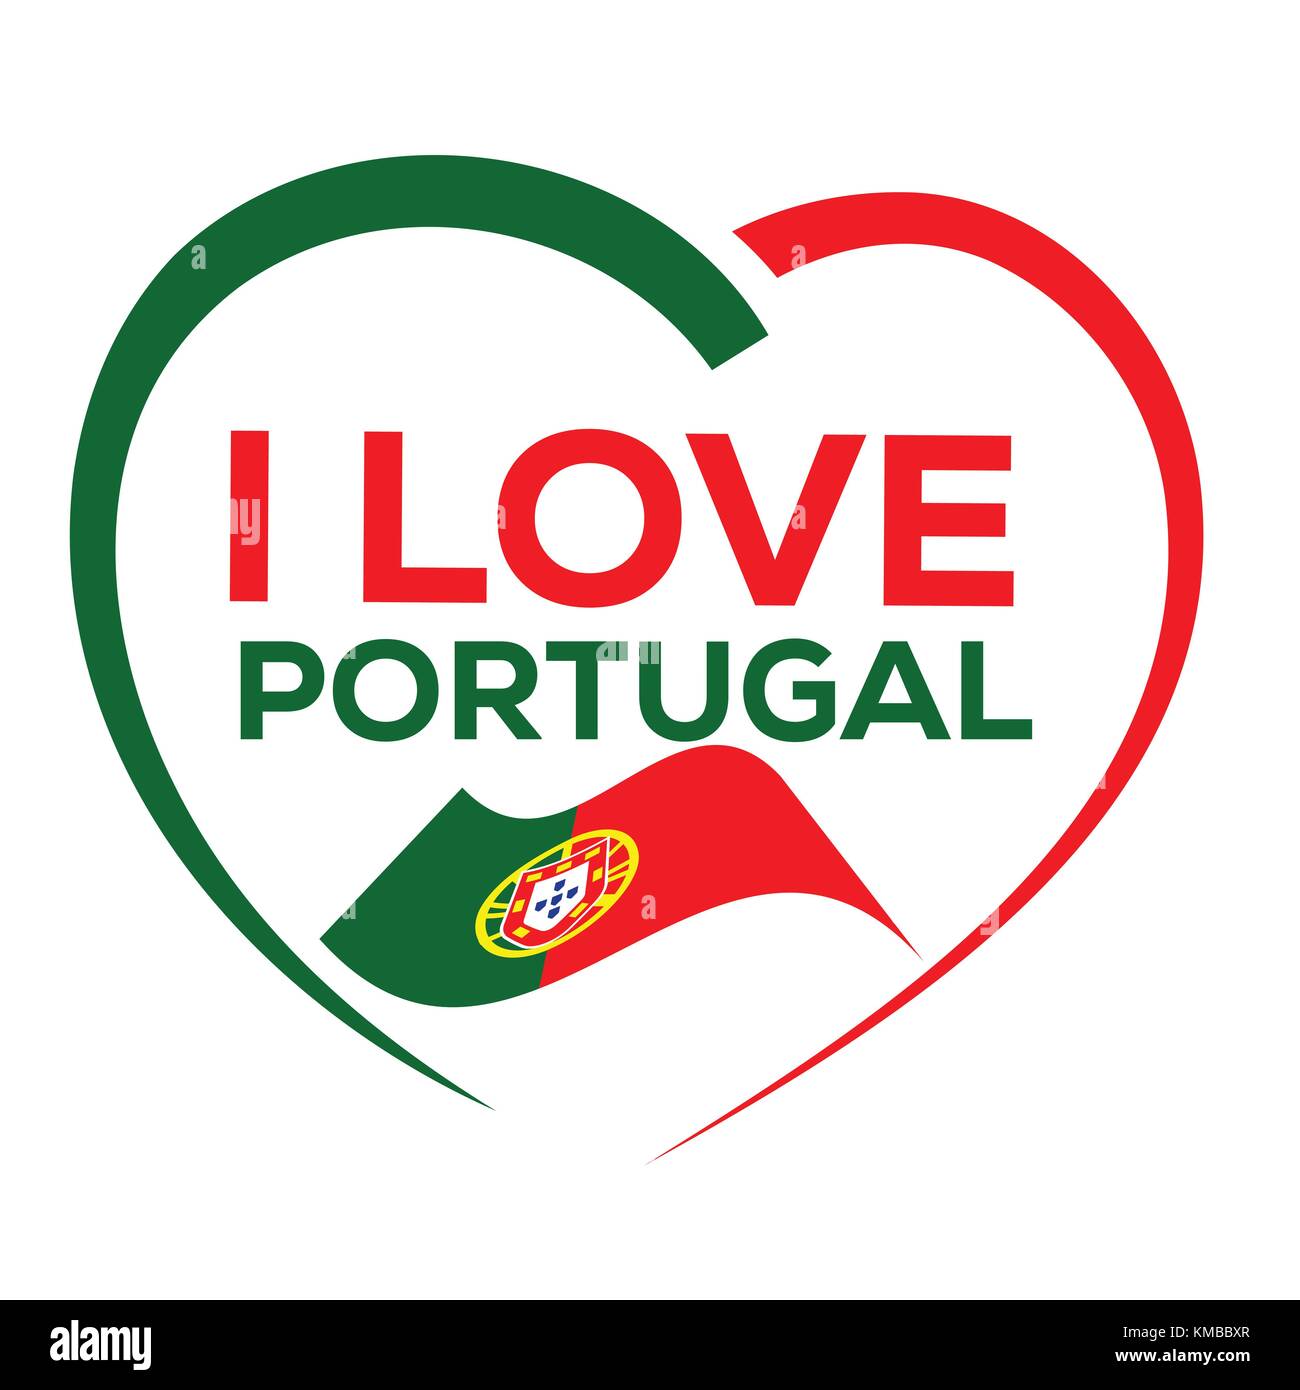 Portugal map city color of country flag. 12177283 PNG